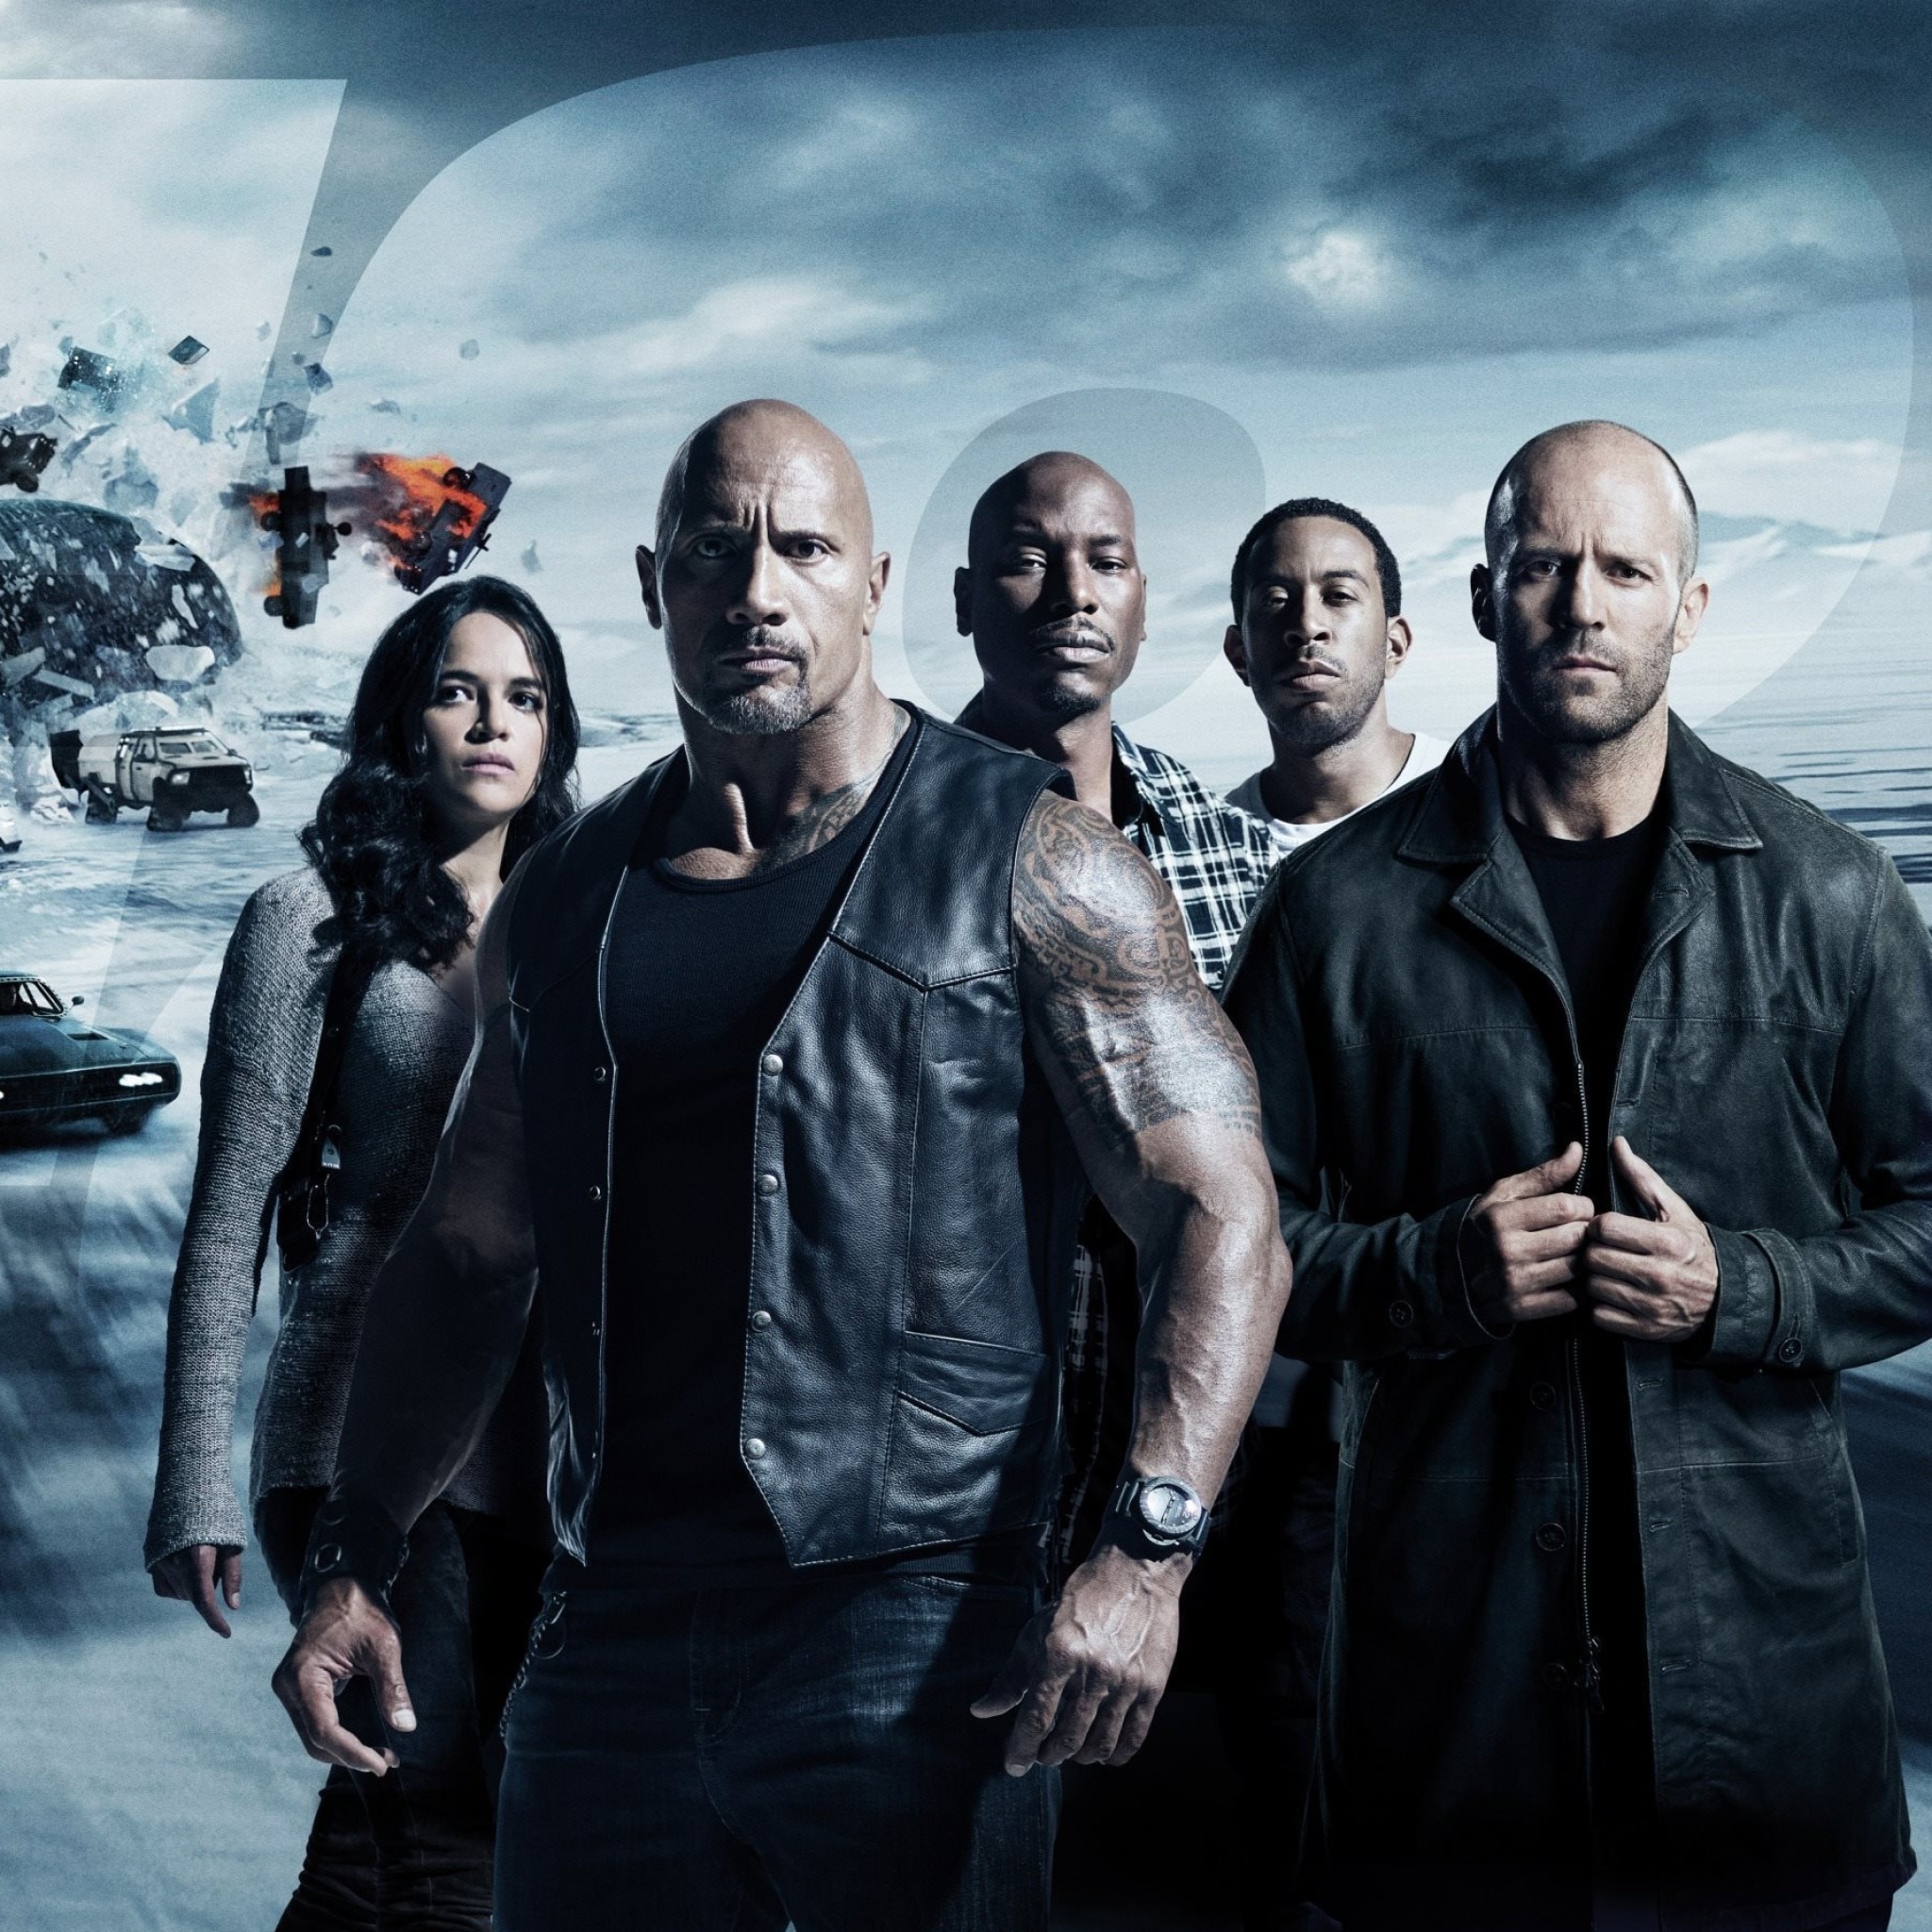 The Fate of the Furious with Vin Diesel, Dwayne Johnson, Charlize Theron screenshot #1 2048x2048